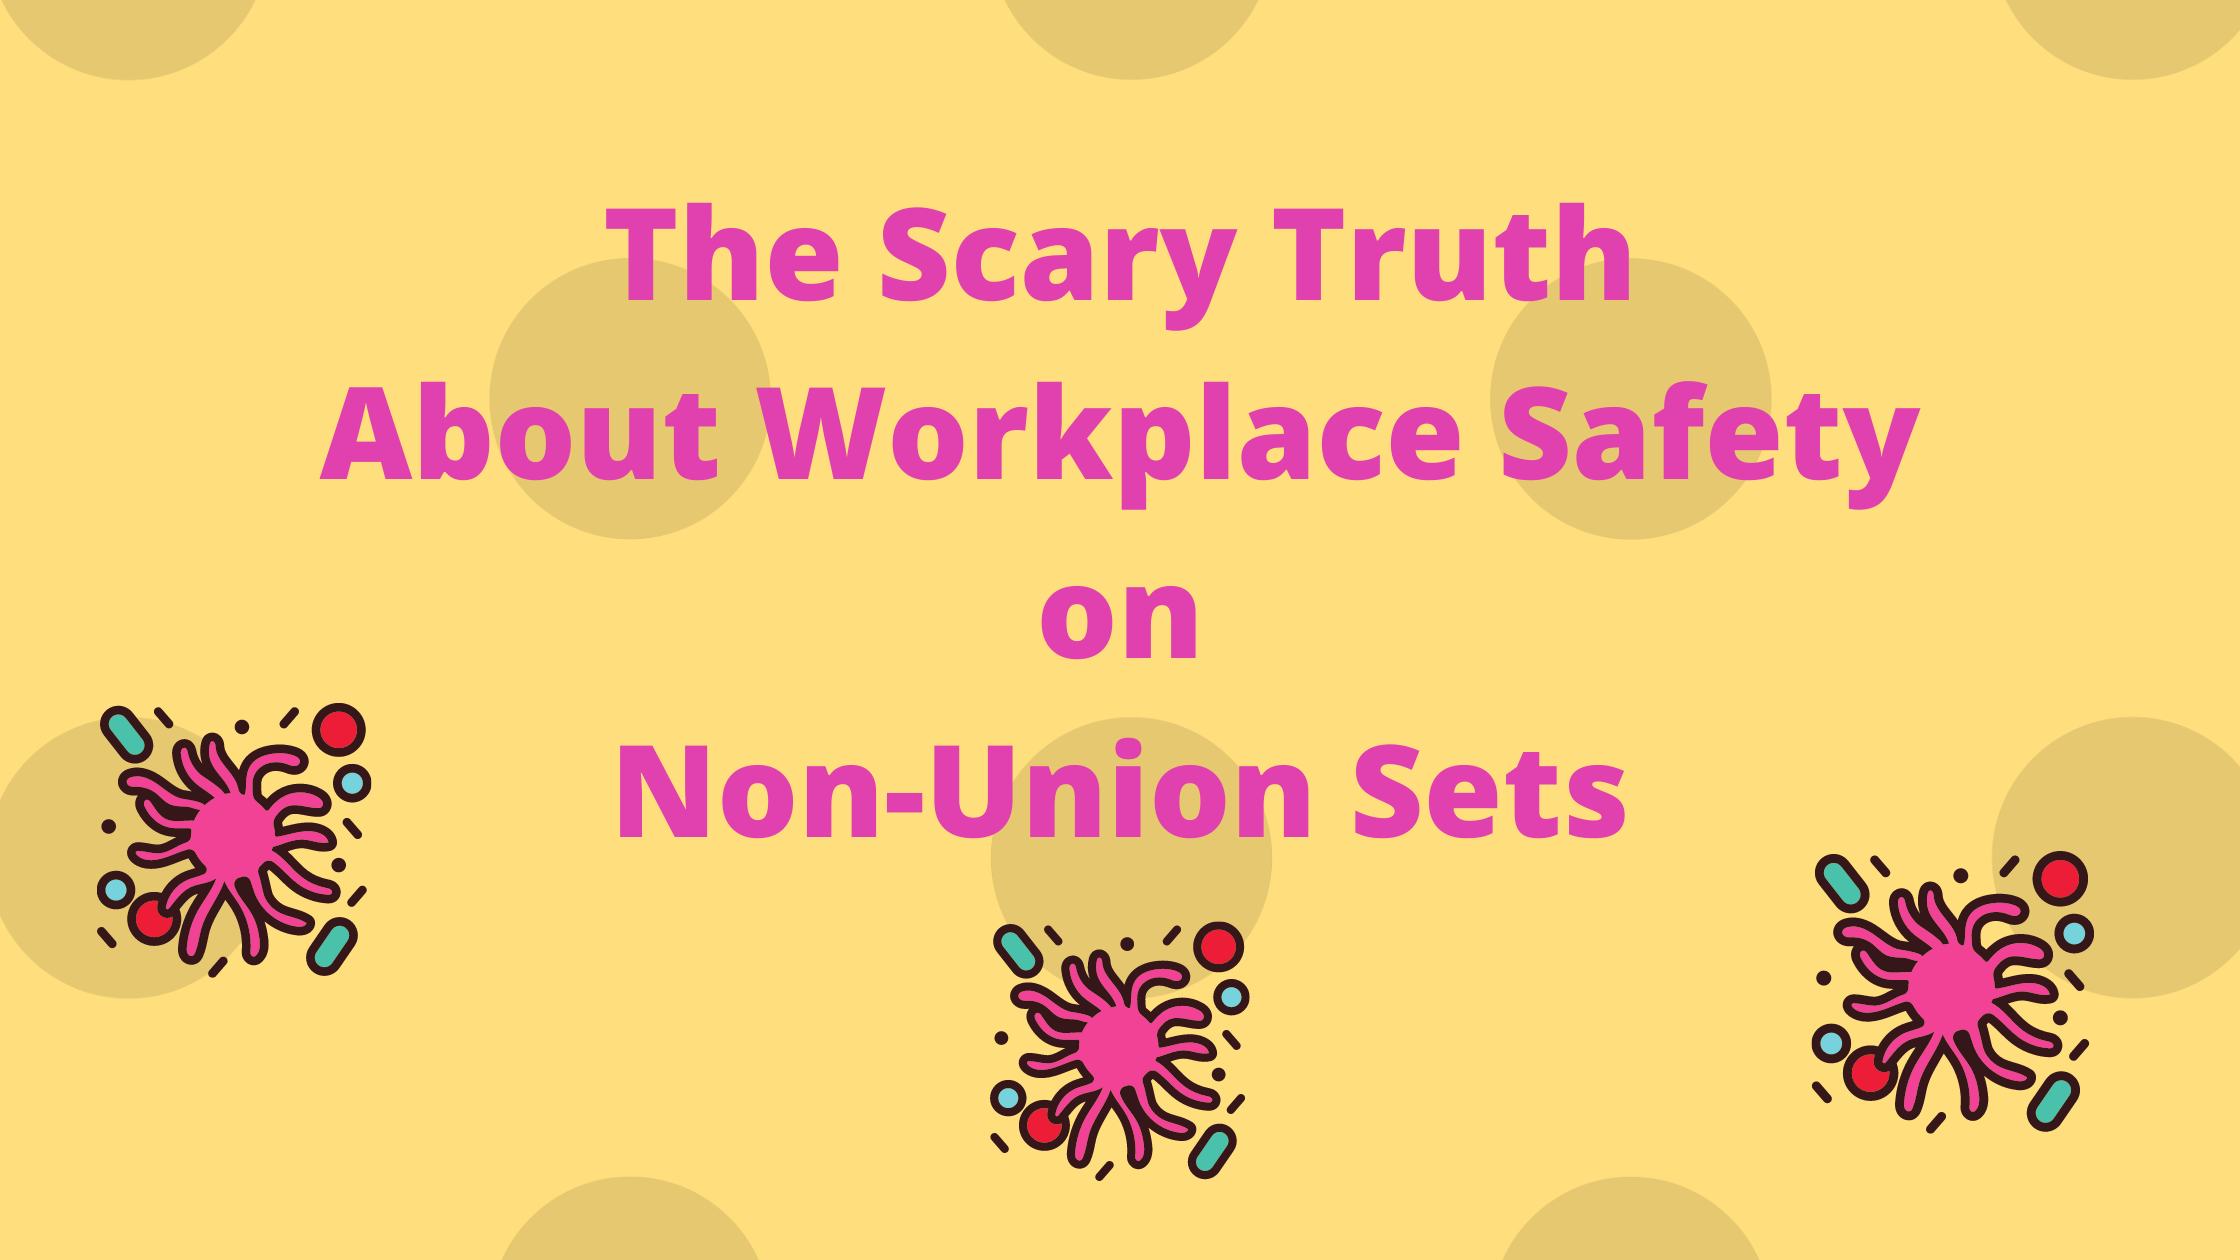 The Scary Truth About Workplace Safety on Non-Union Sets